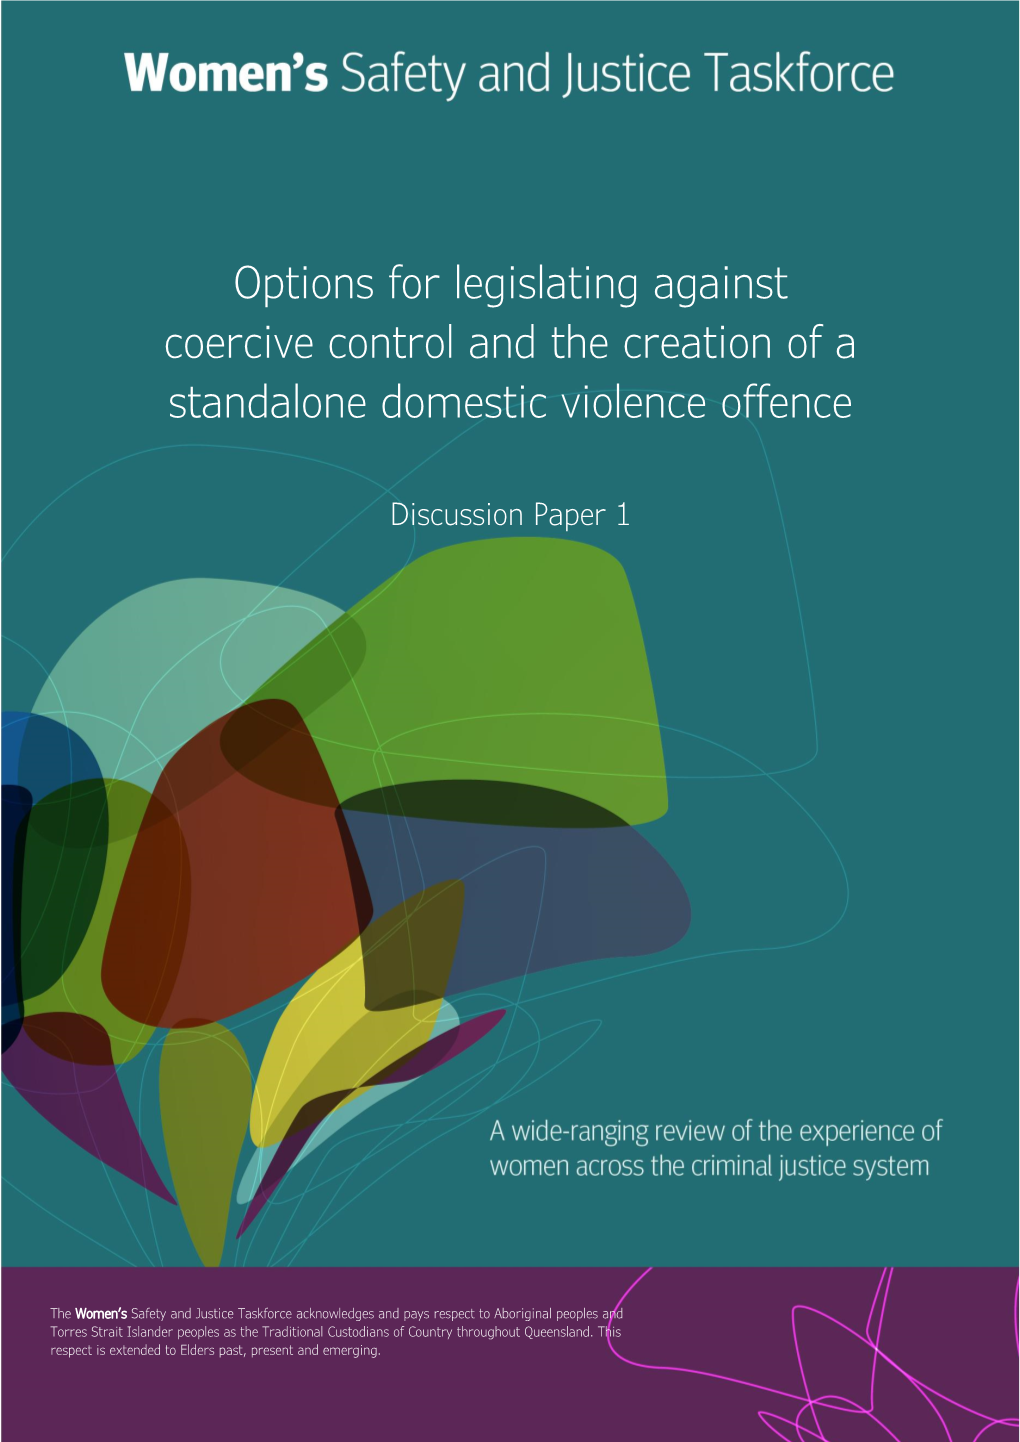 Options for Legislating Against Coercive Control and the Creation of a Standalone Domestic Violence Offence